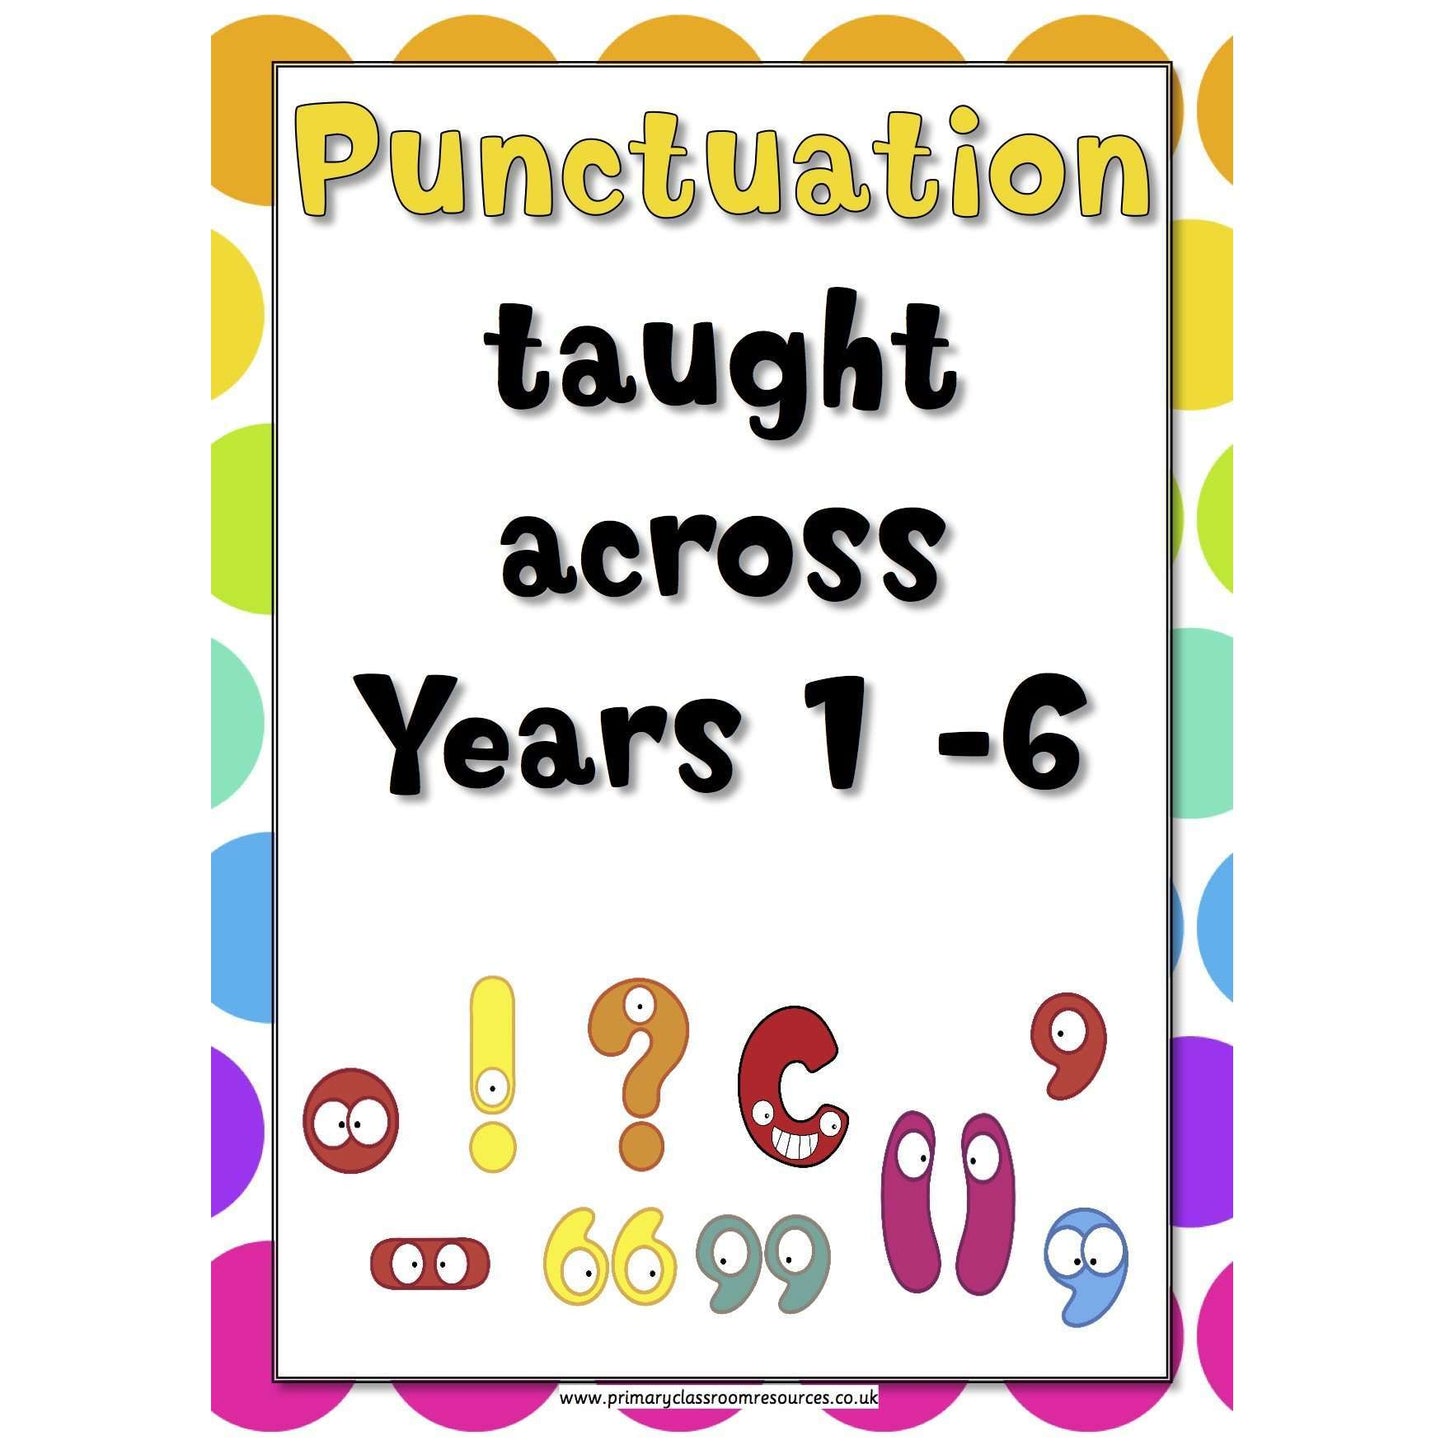 A3 Laminated - Punctuation Across the Years Poster Pack - 2014 Curriculum:Primary Classroom Resources